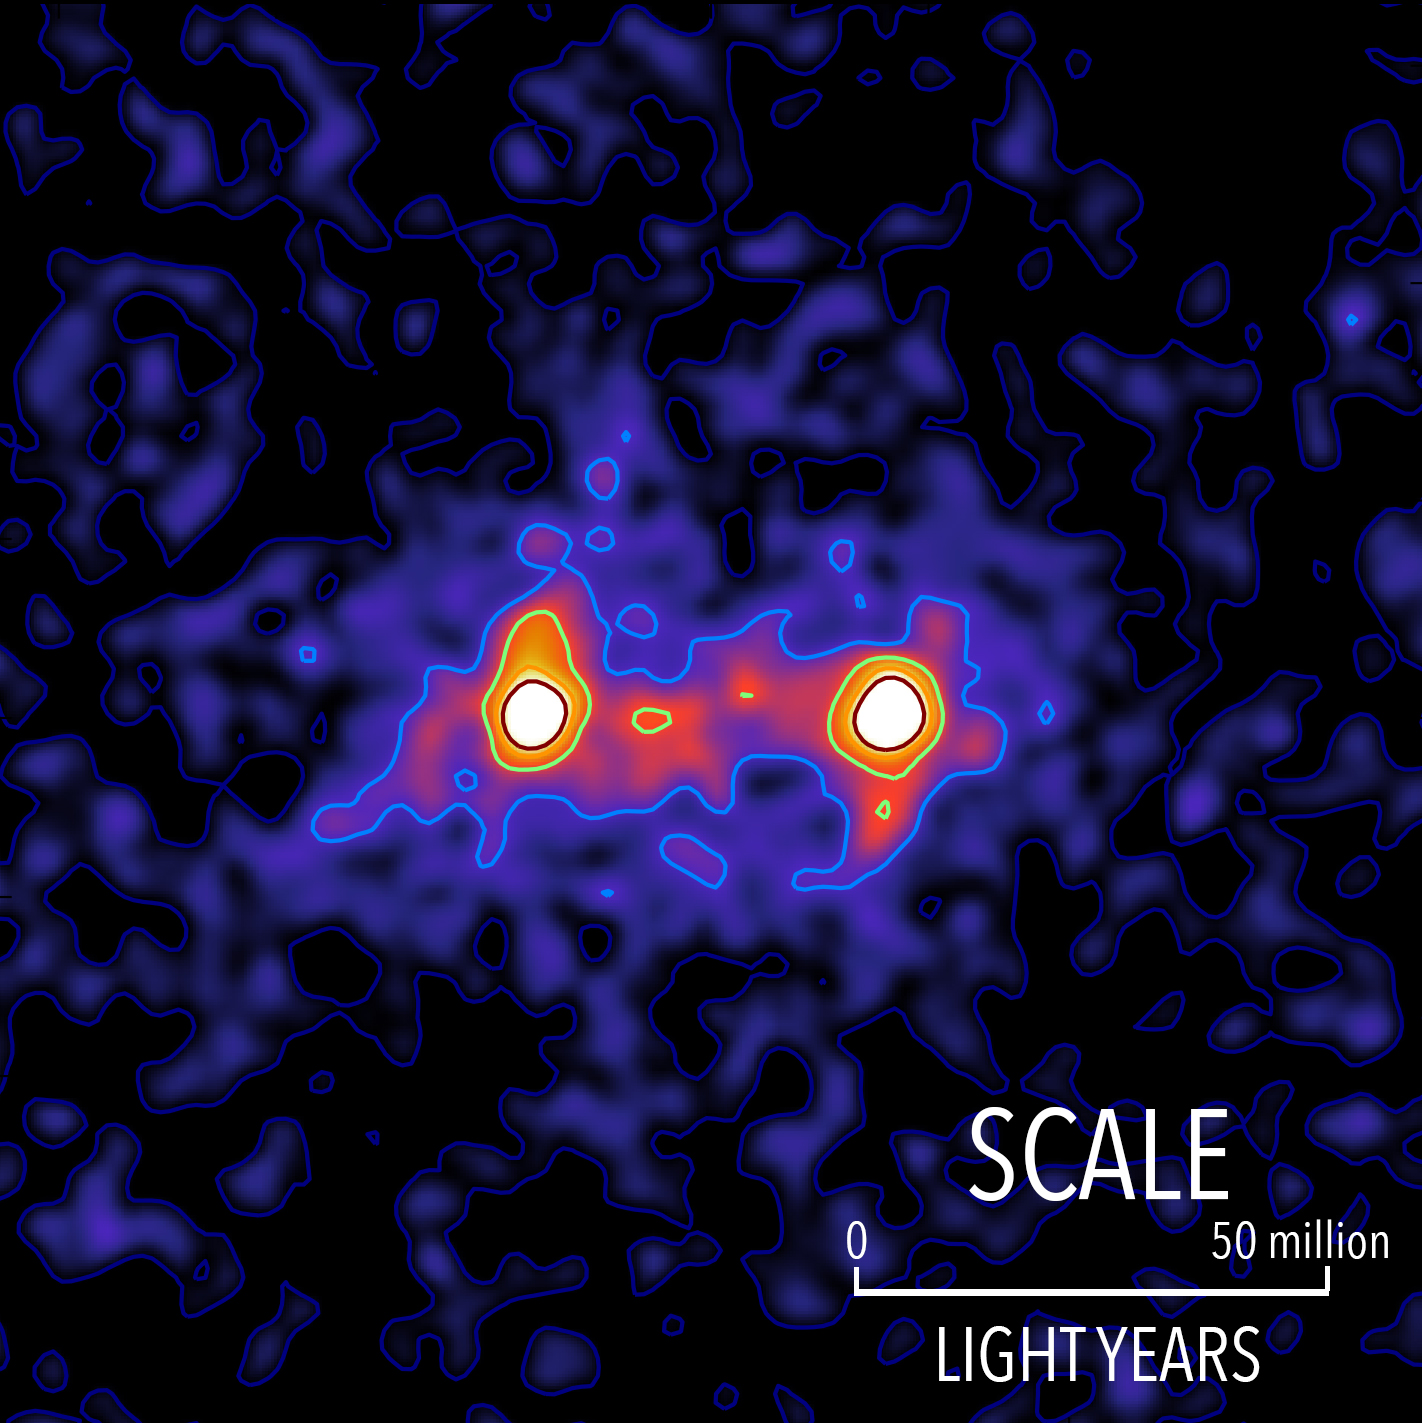 Researchers capture first 'image' of a dark matter web that connects galaxies